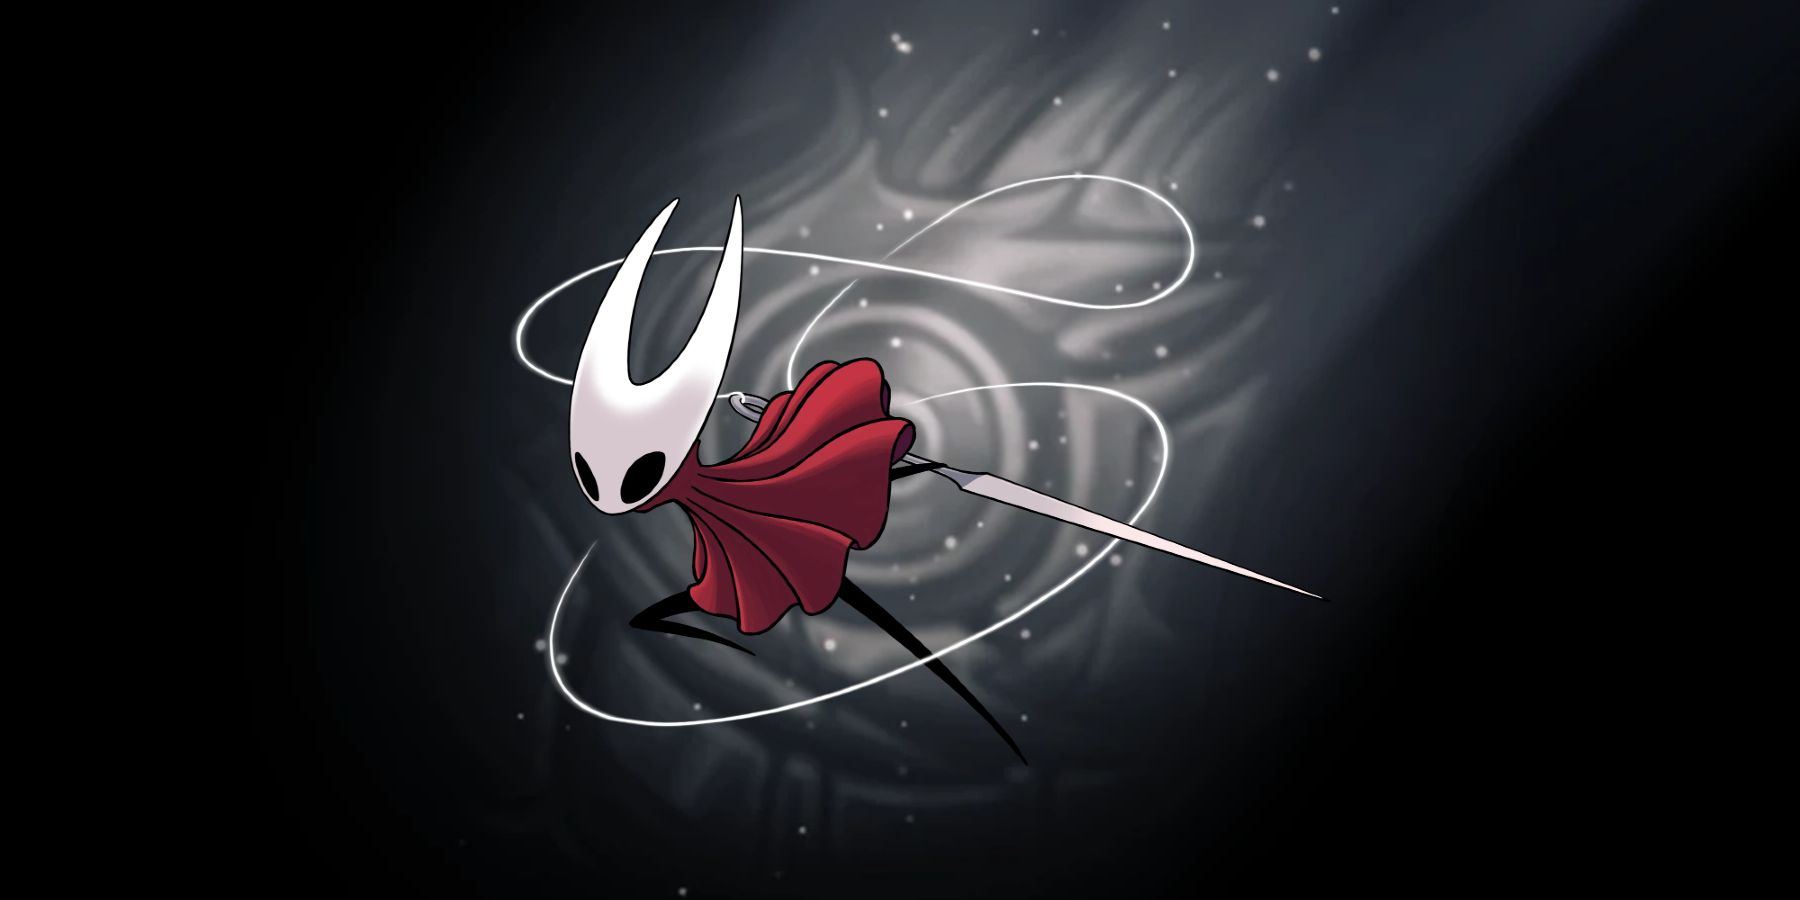 silksong release date hollow knight